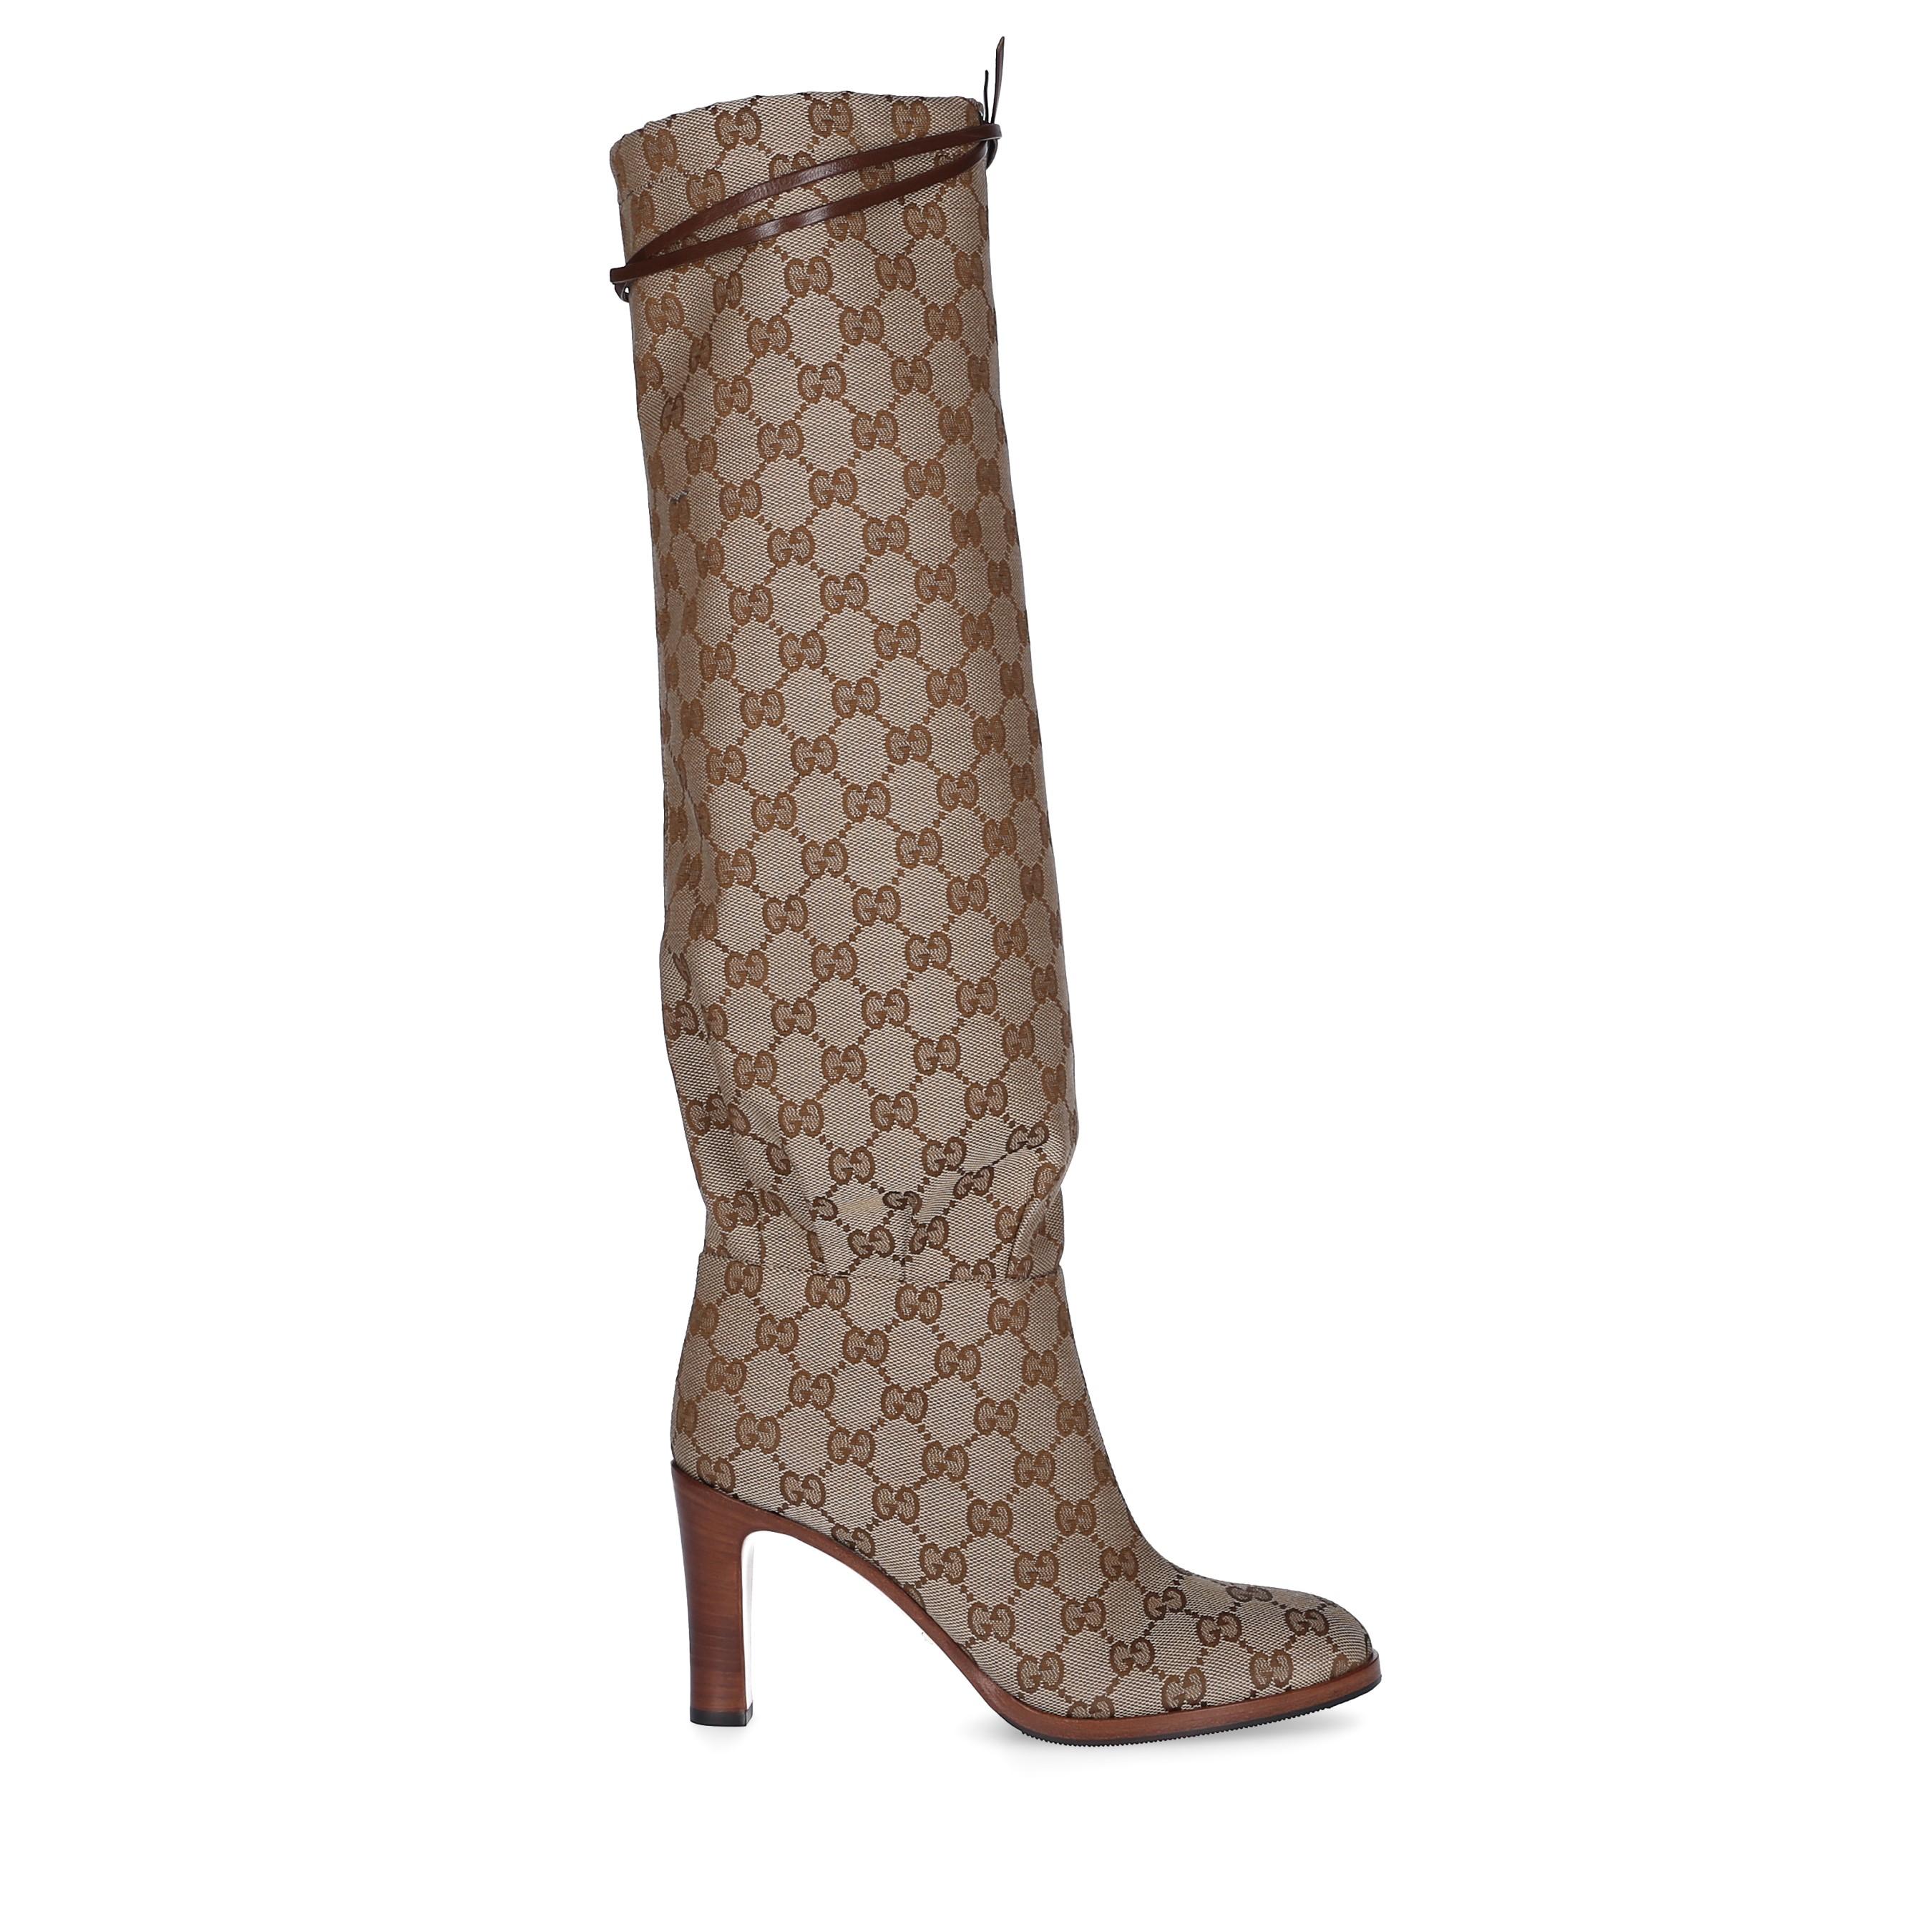 Gucci Canvas Boots Long Shaft Ky9v0 in Beige (Natural) - Lyst